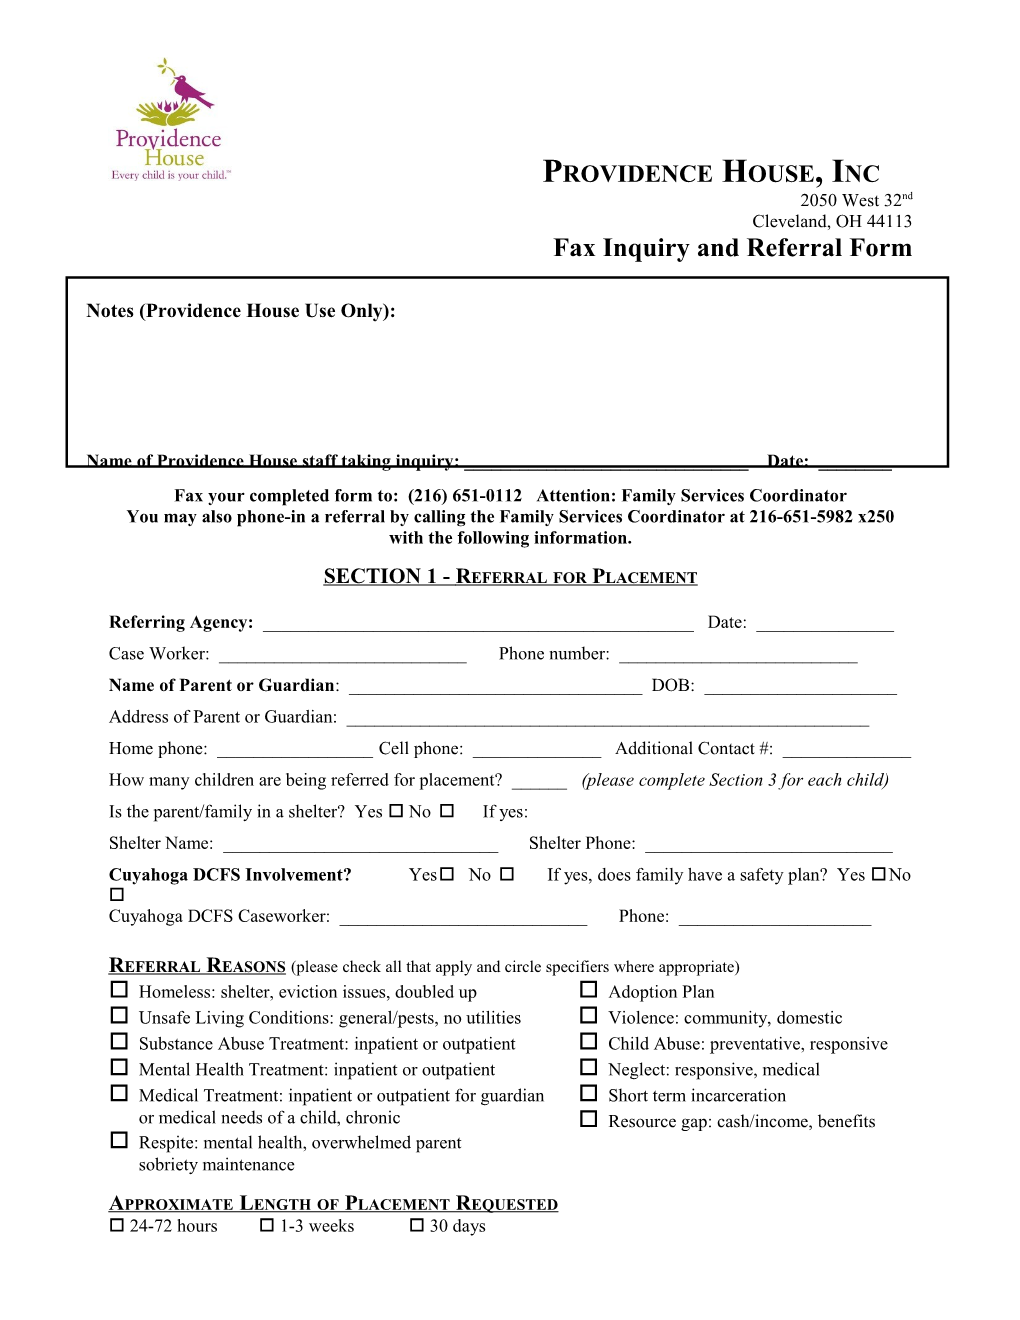 Providence House, Fax Inquiry/Referral Form